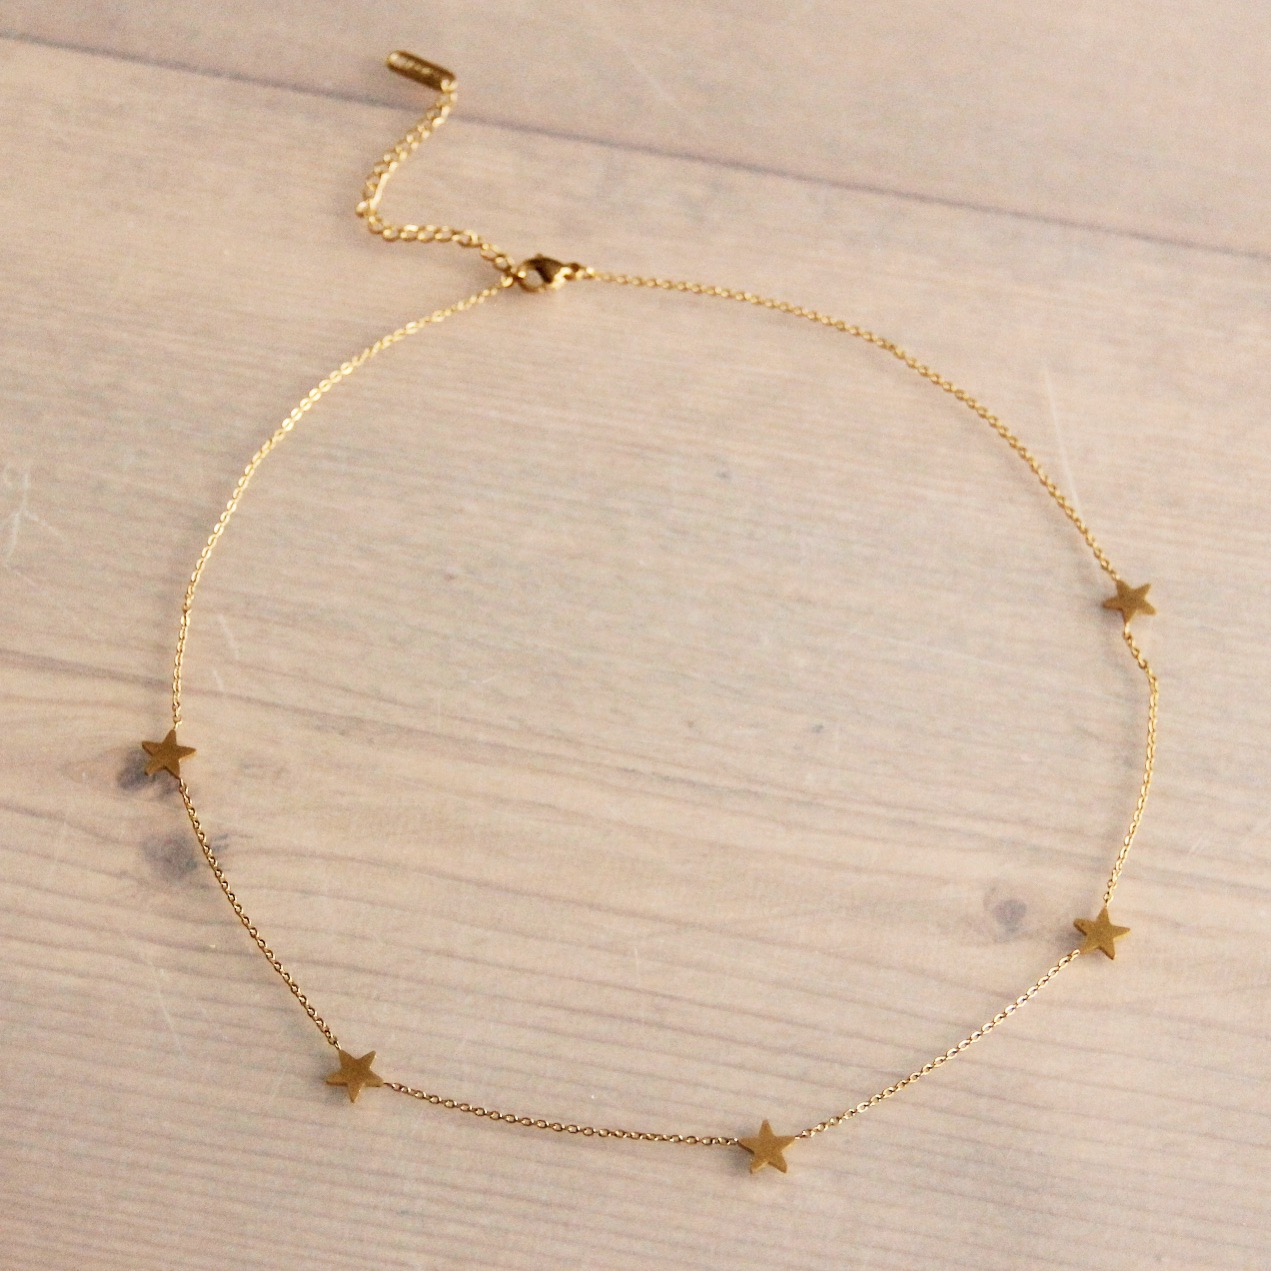 Bazou Short Necklace With Stars - Gold